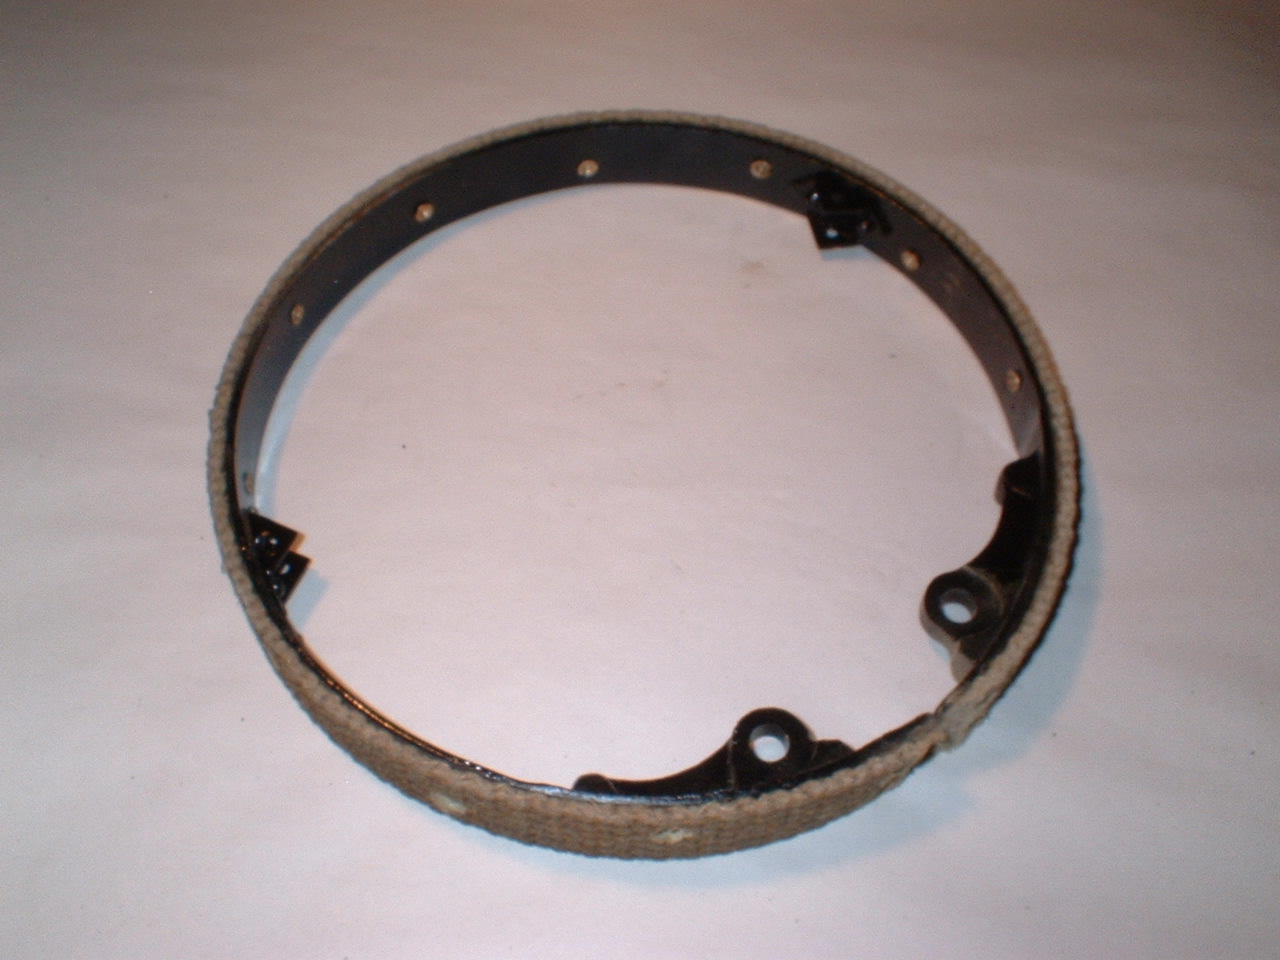 Lined New Emergency Brake Band -  Model A Ford  - Model A Ford - Buy Online!